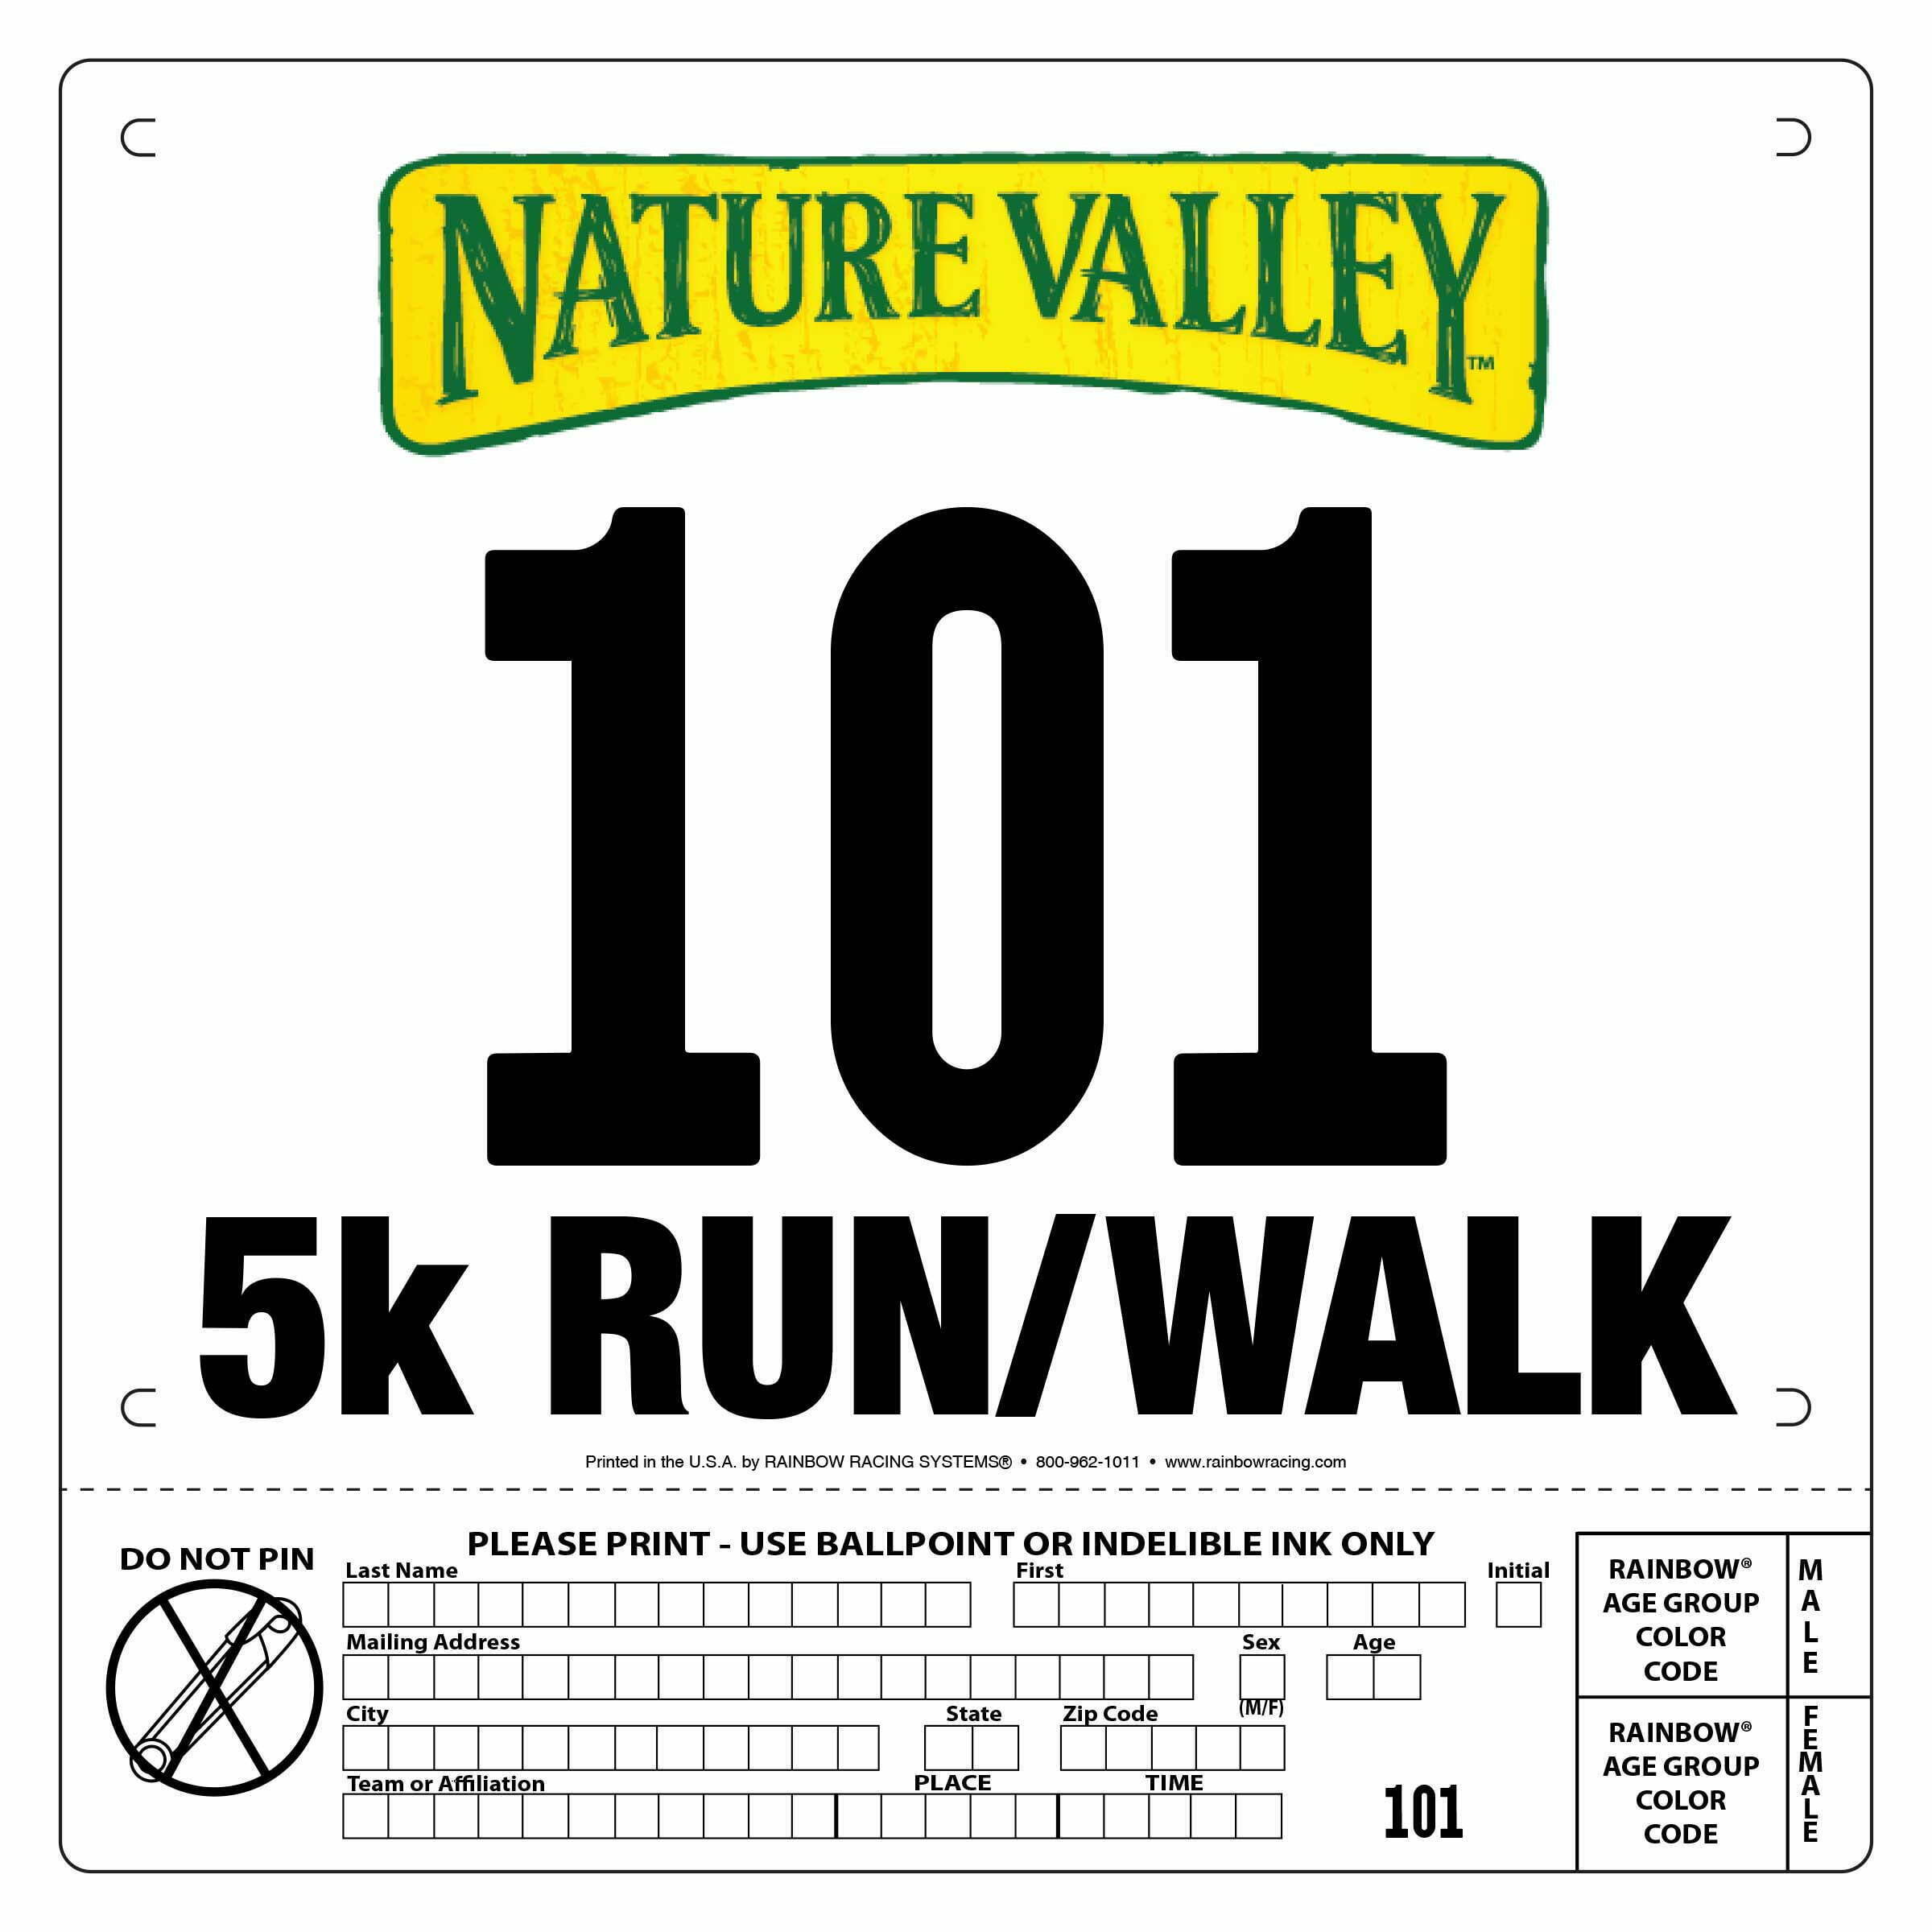 Nature Valley 5k 2018